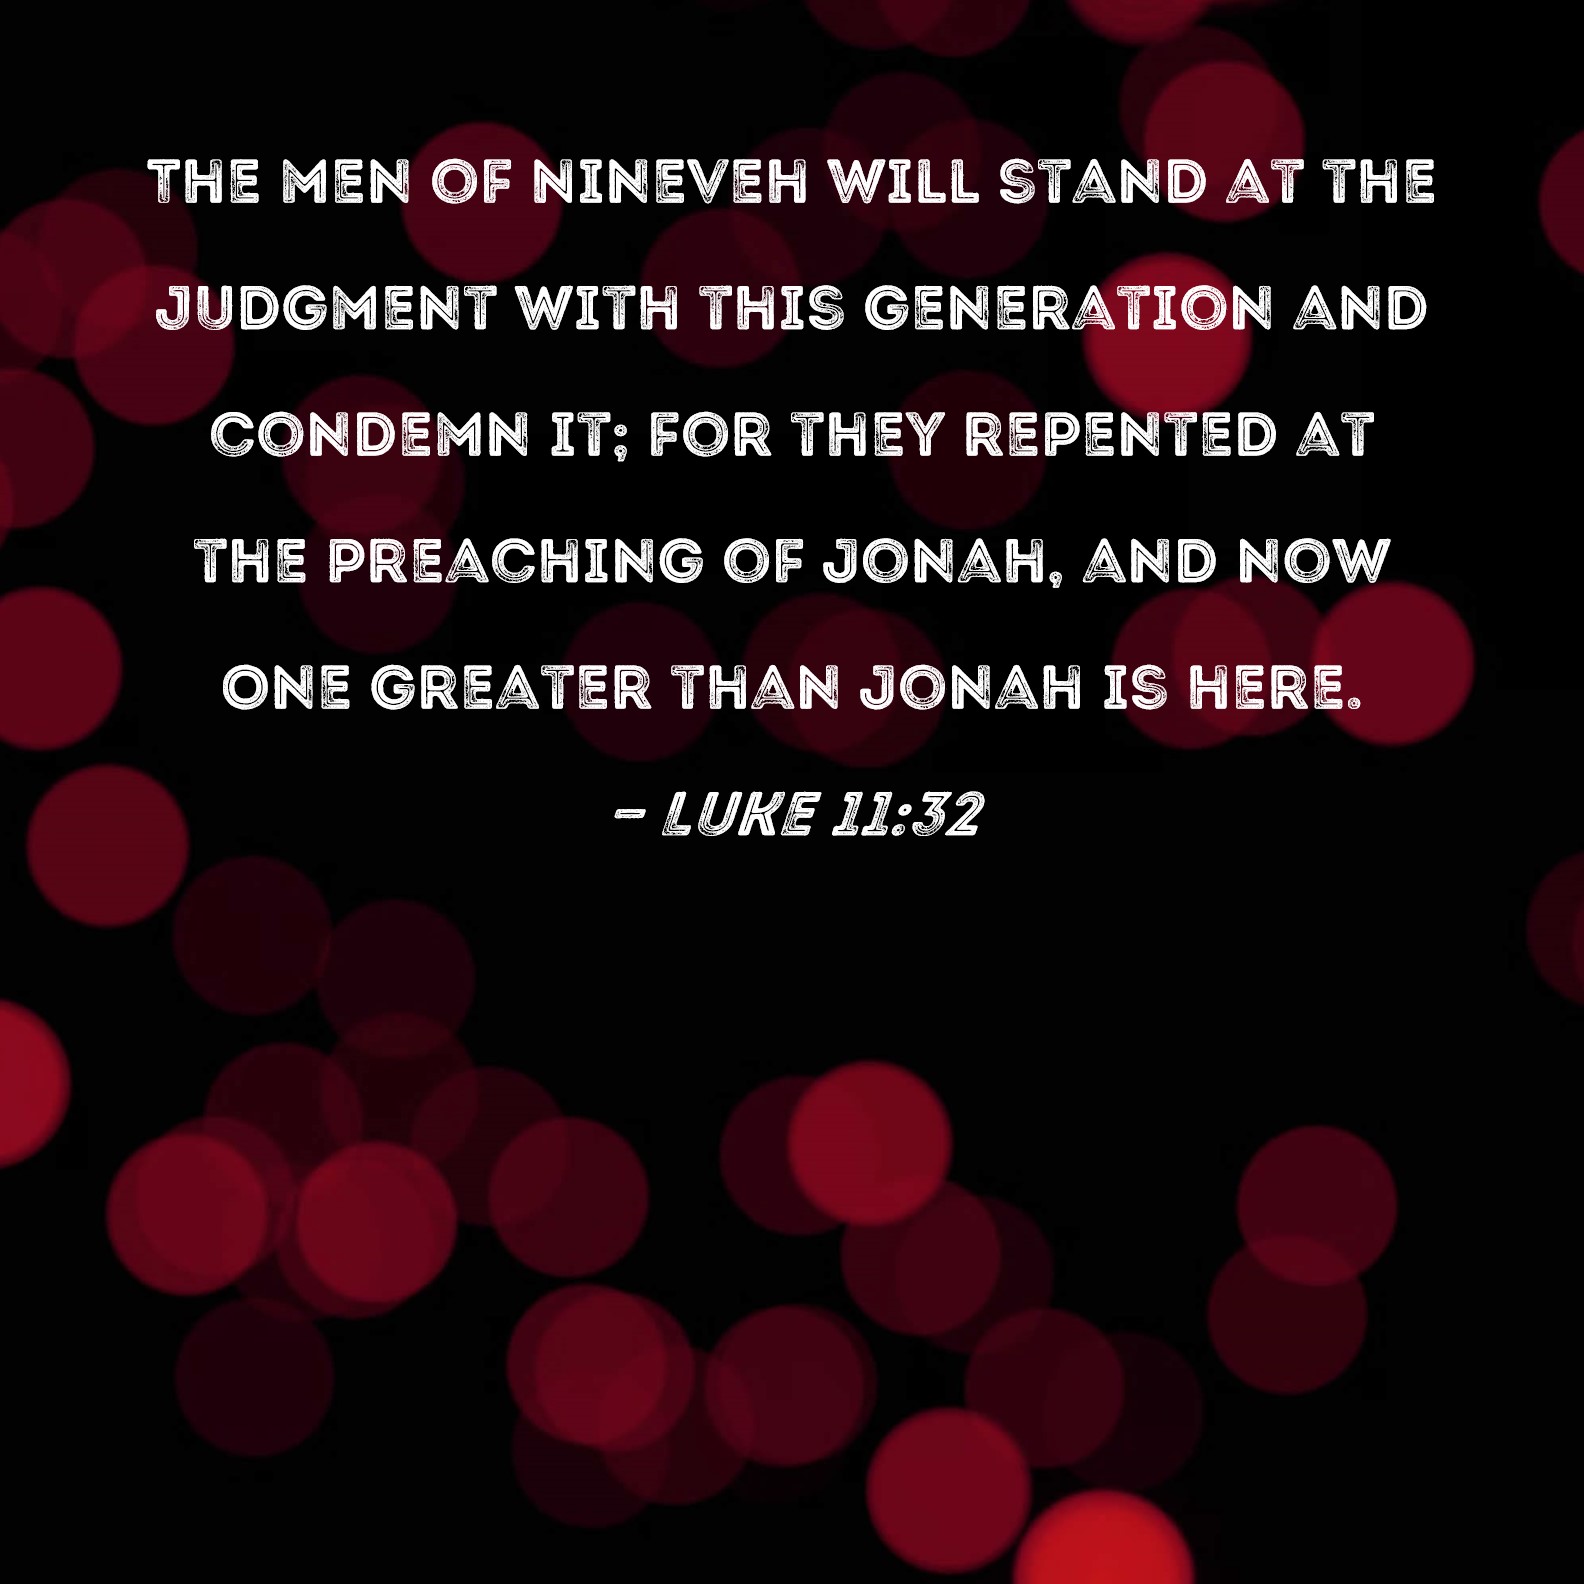 Luke 11:32 The men of Nineveh will stand at the judgment with this ...